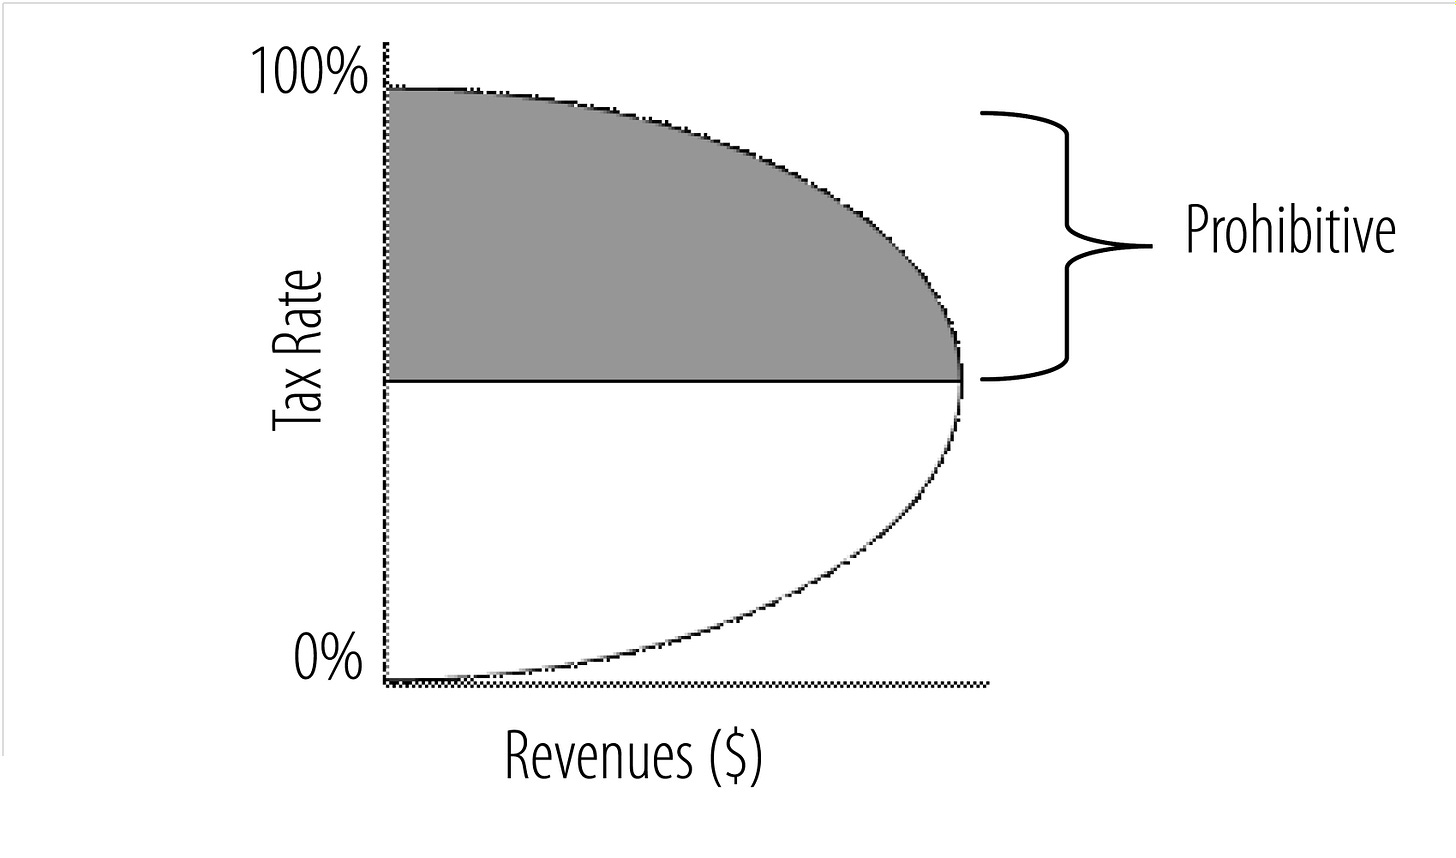 Laffer Curve: Definition, Explanation of the Idea Behind ...